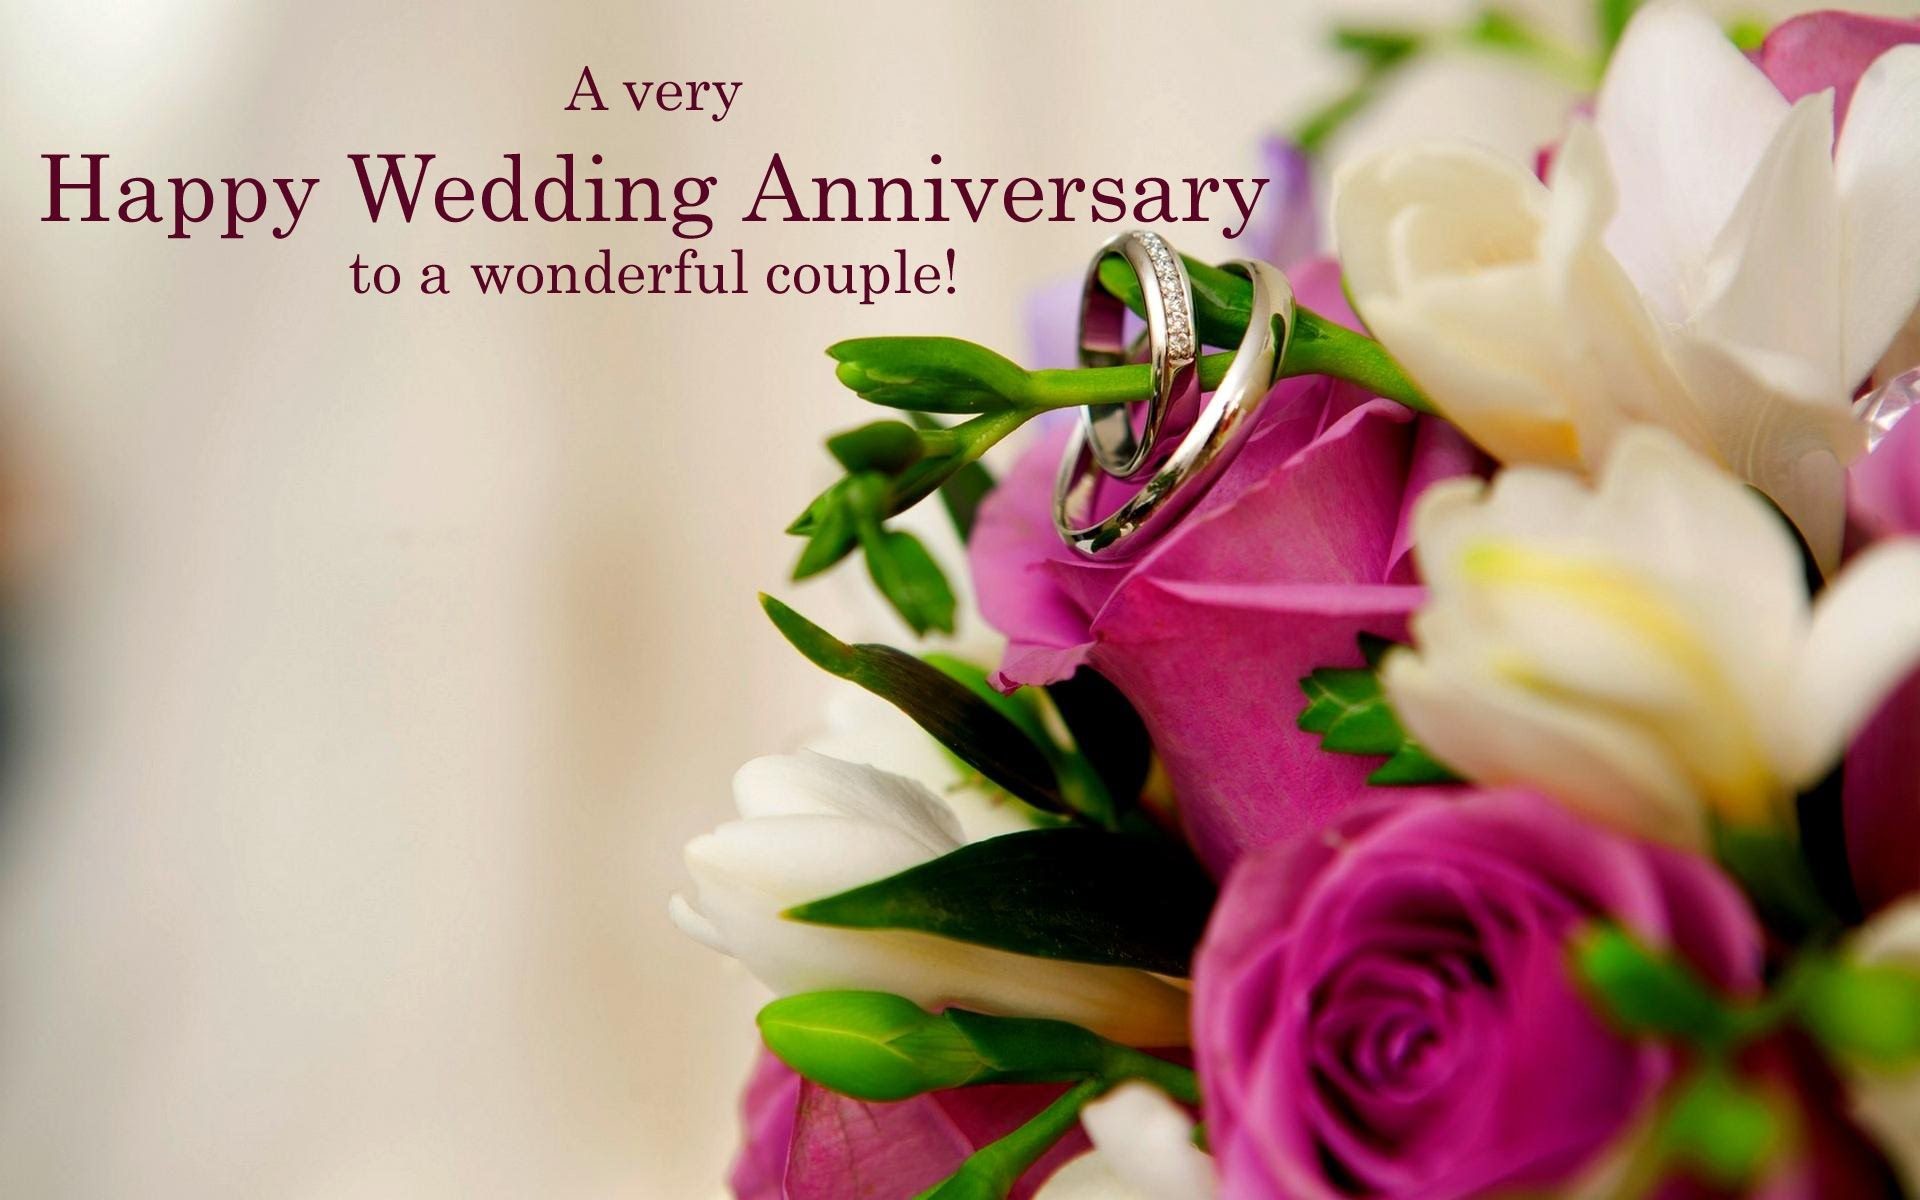 1920x1200 Wedding Anniversary Wishes HD Wallpaper | 9To5Animations.Com